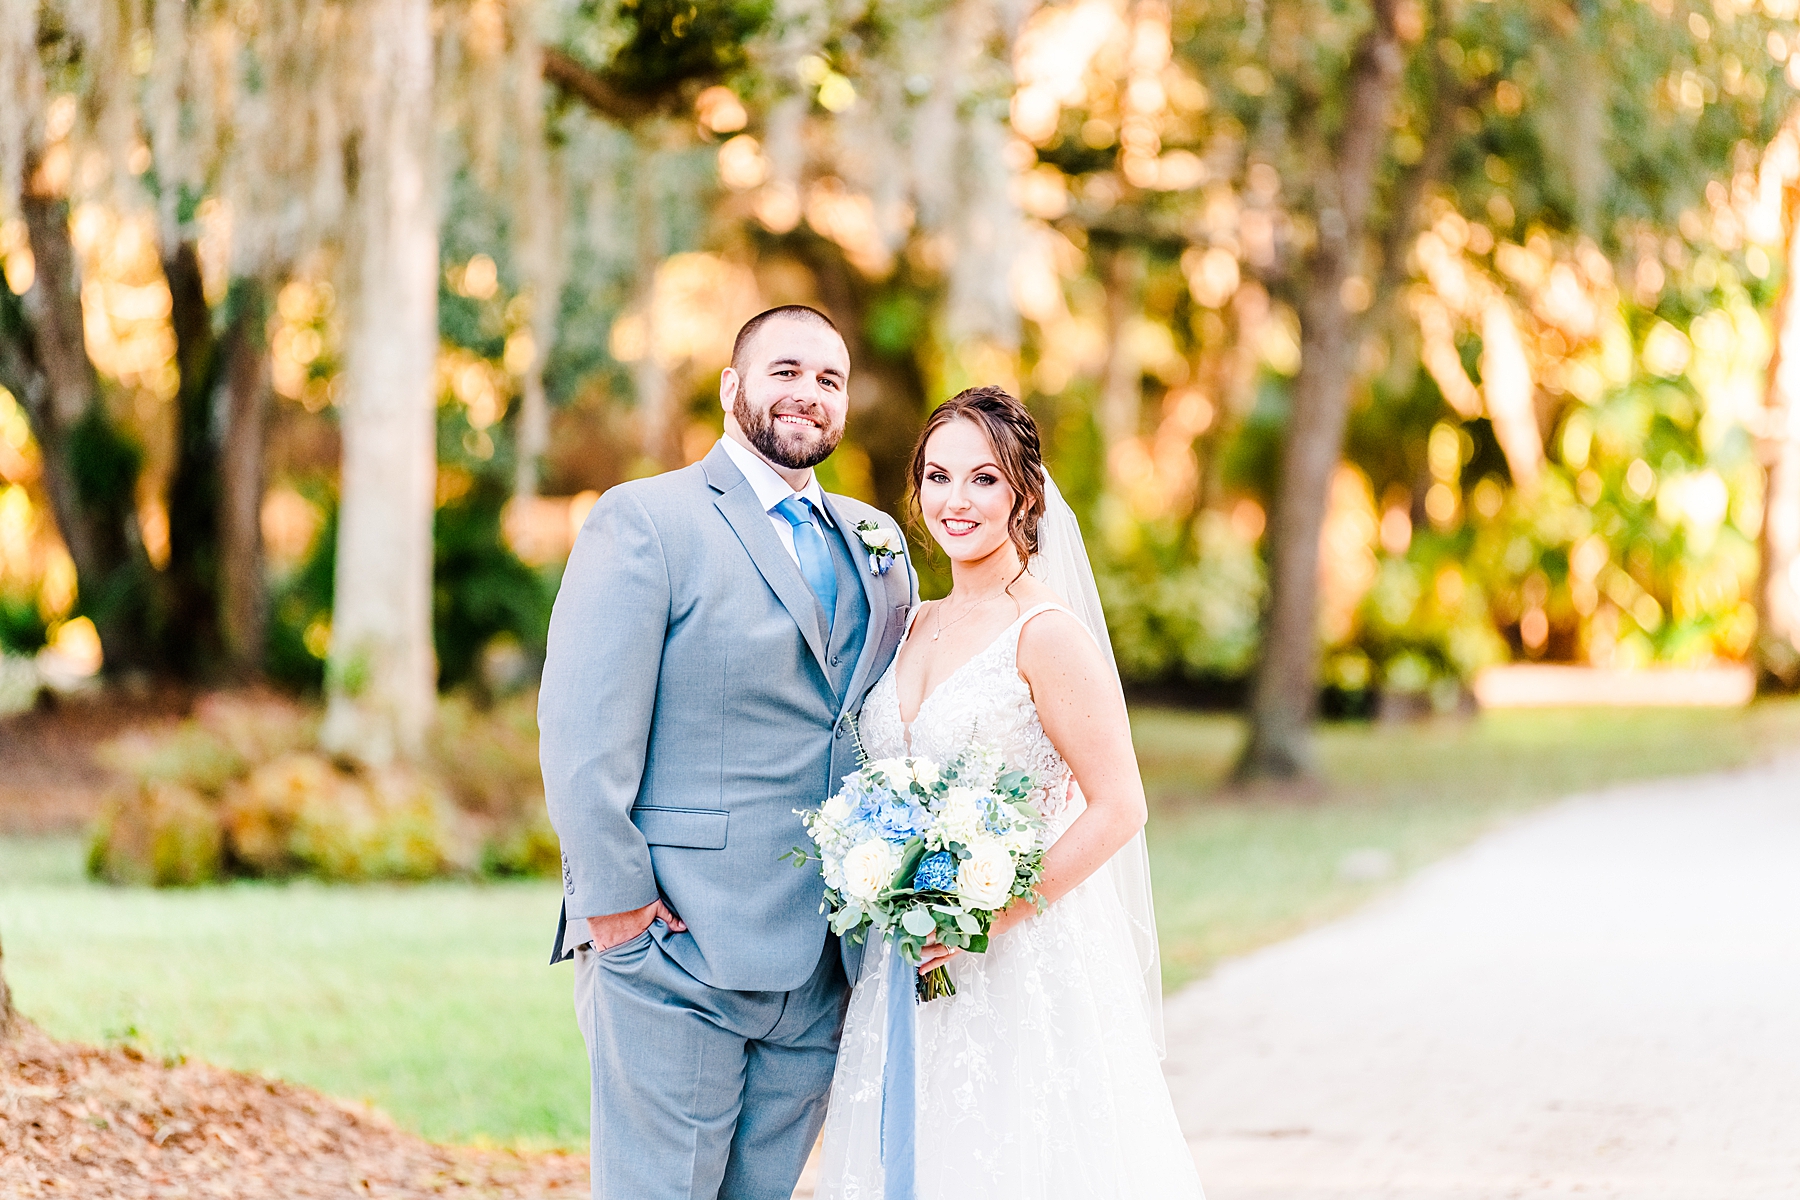 Bridal Gown | The Delamater House Wedding | Chynna Pacheco Photography-725